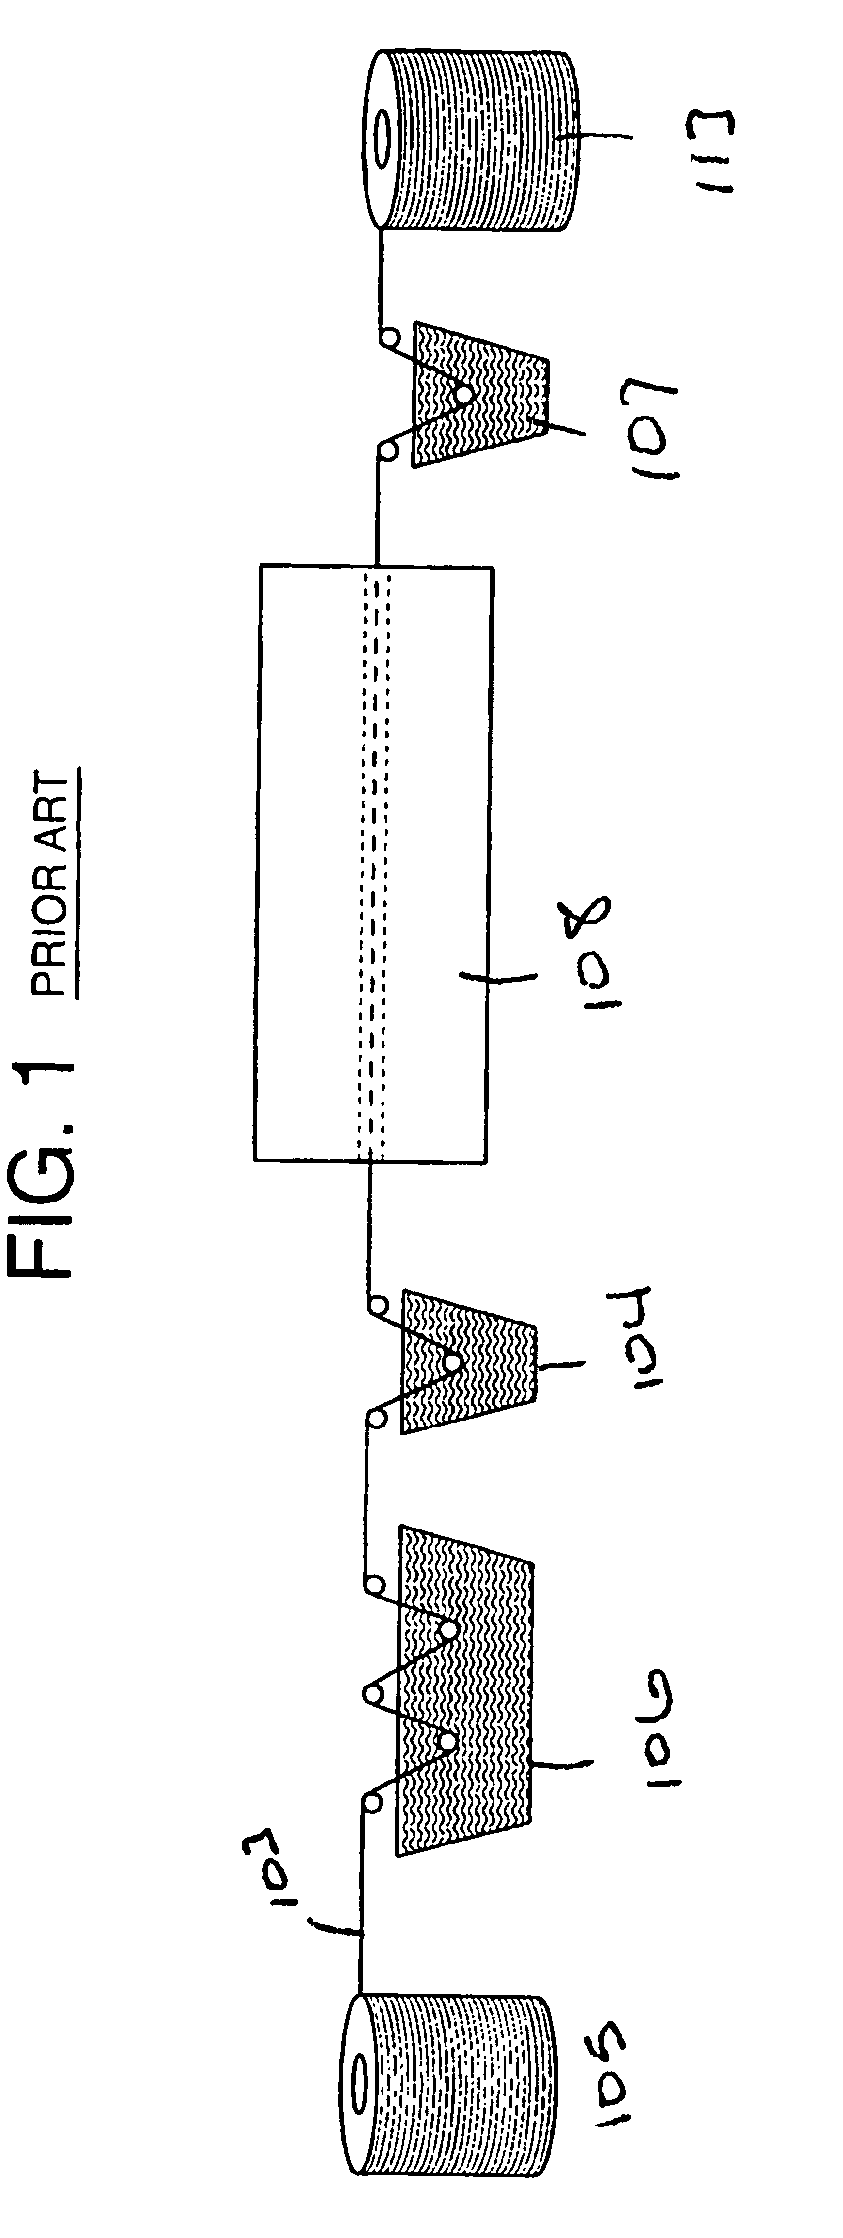 Long fiber thermoplastic process for conductive composites and composites formed thereby